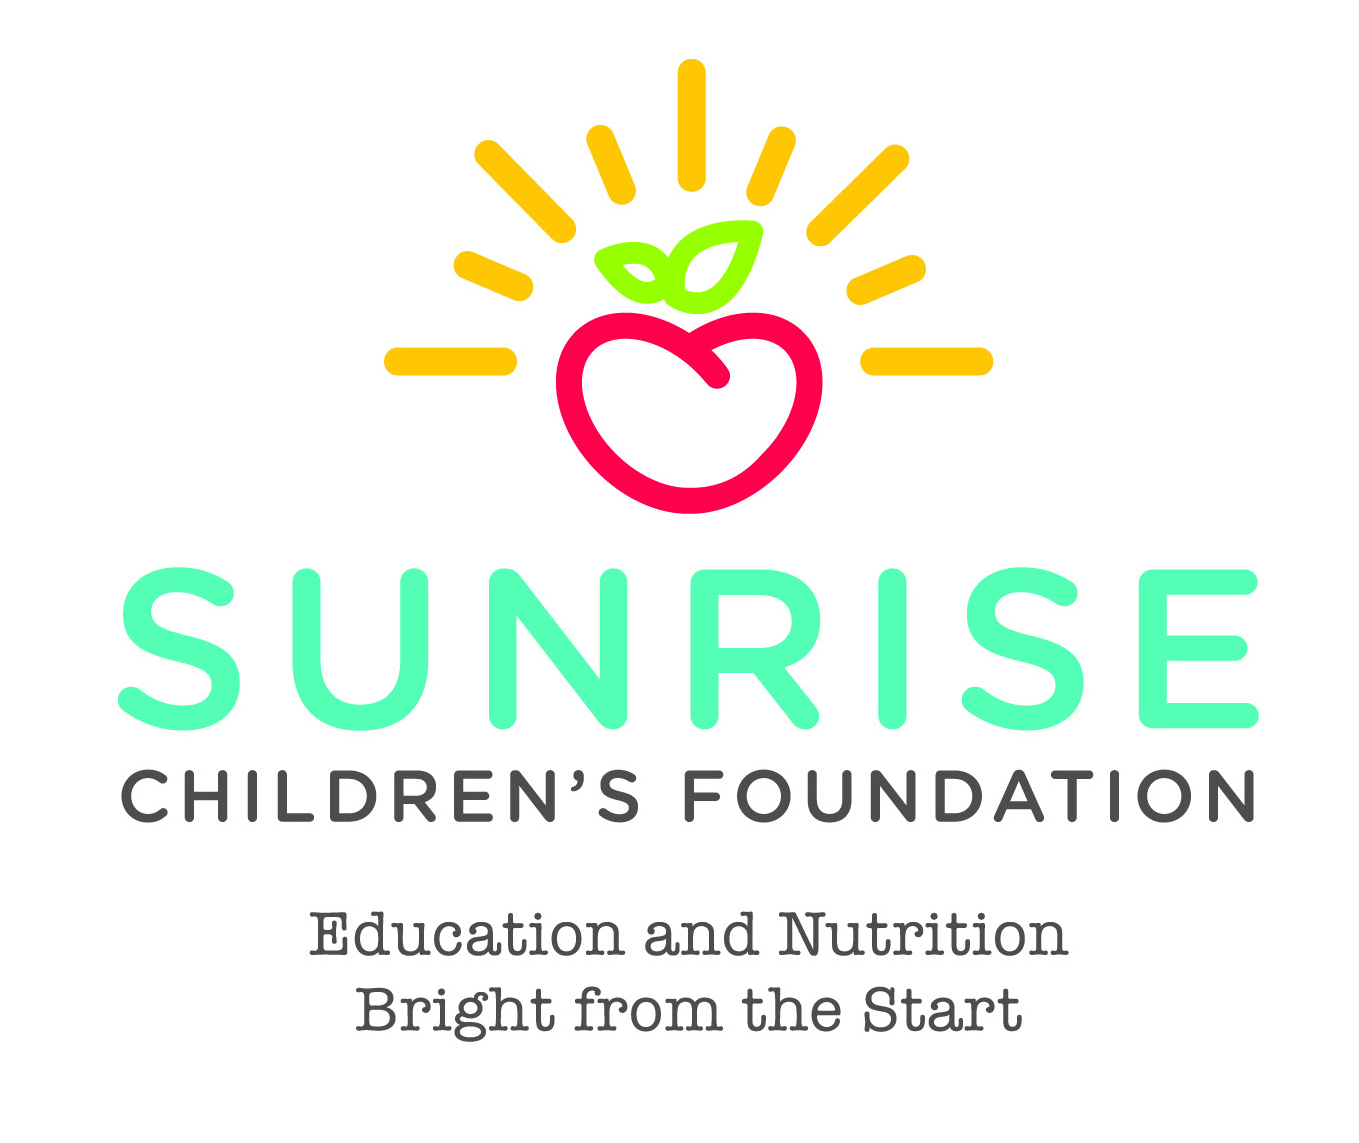 On National Non-Profit Day, Sunrise Children’s Foundation, whose mission is to fulfill their potential of safe, healthy and educated lives, debuts its new direction.